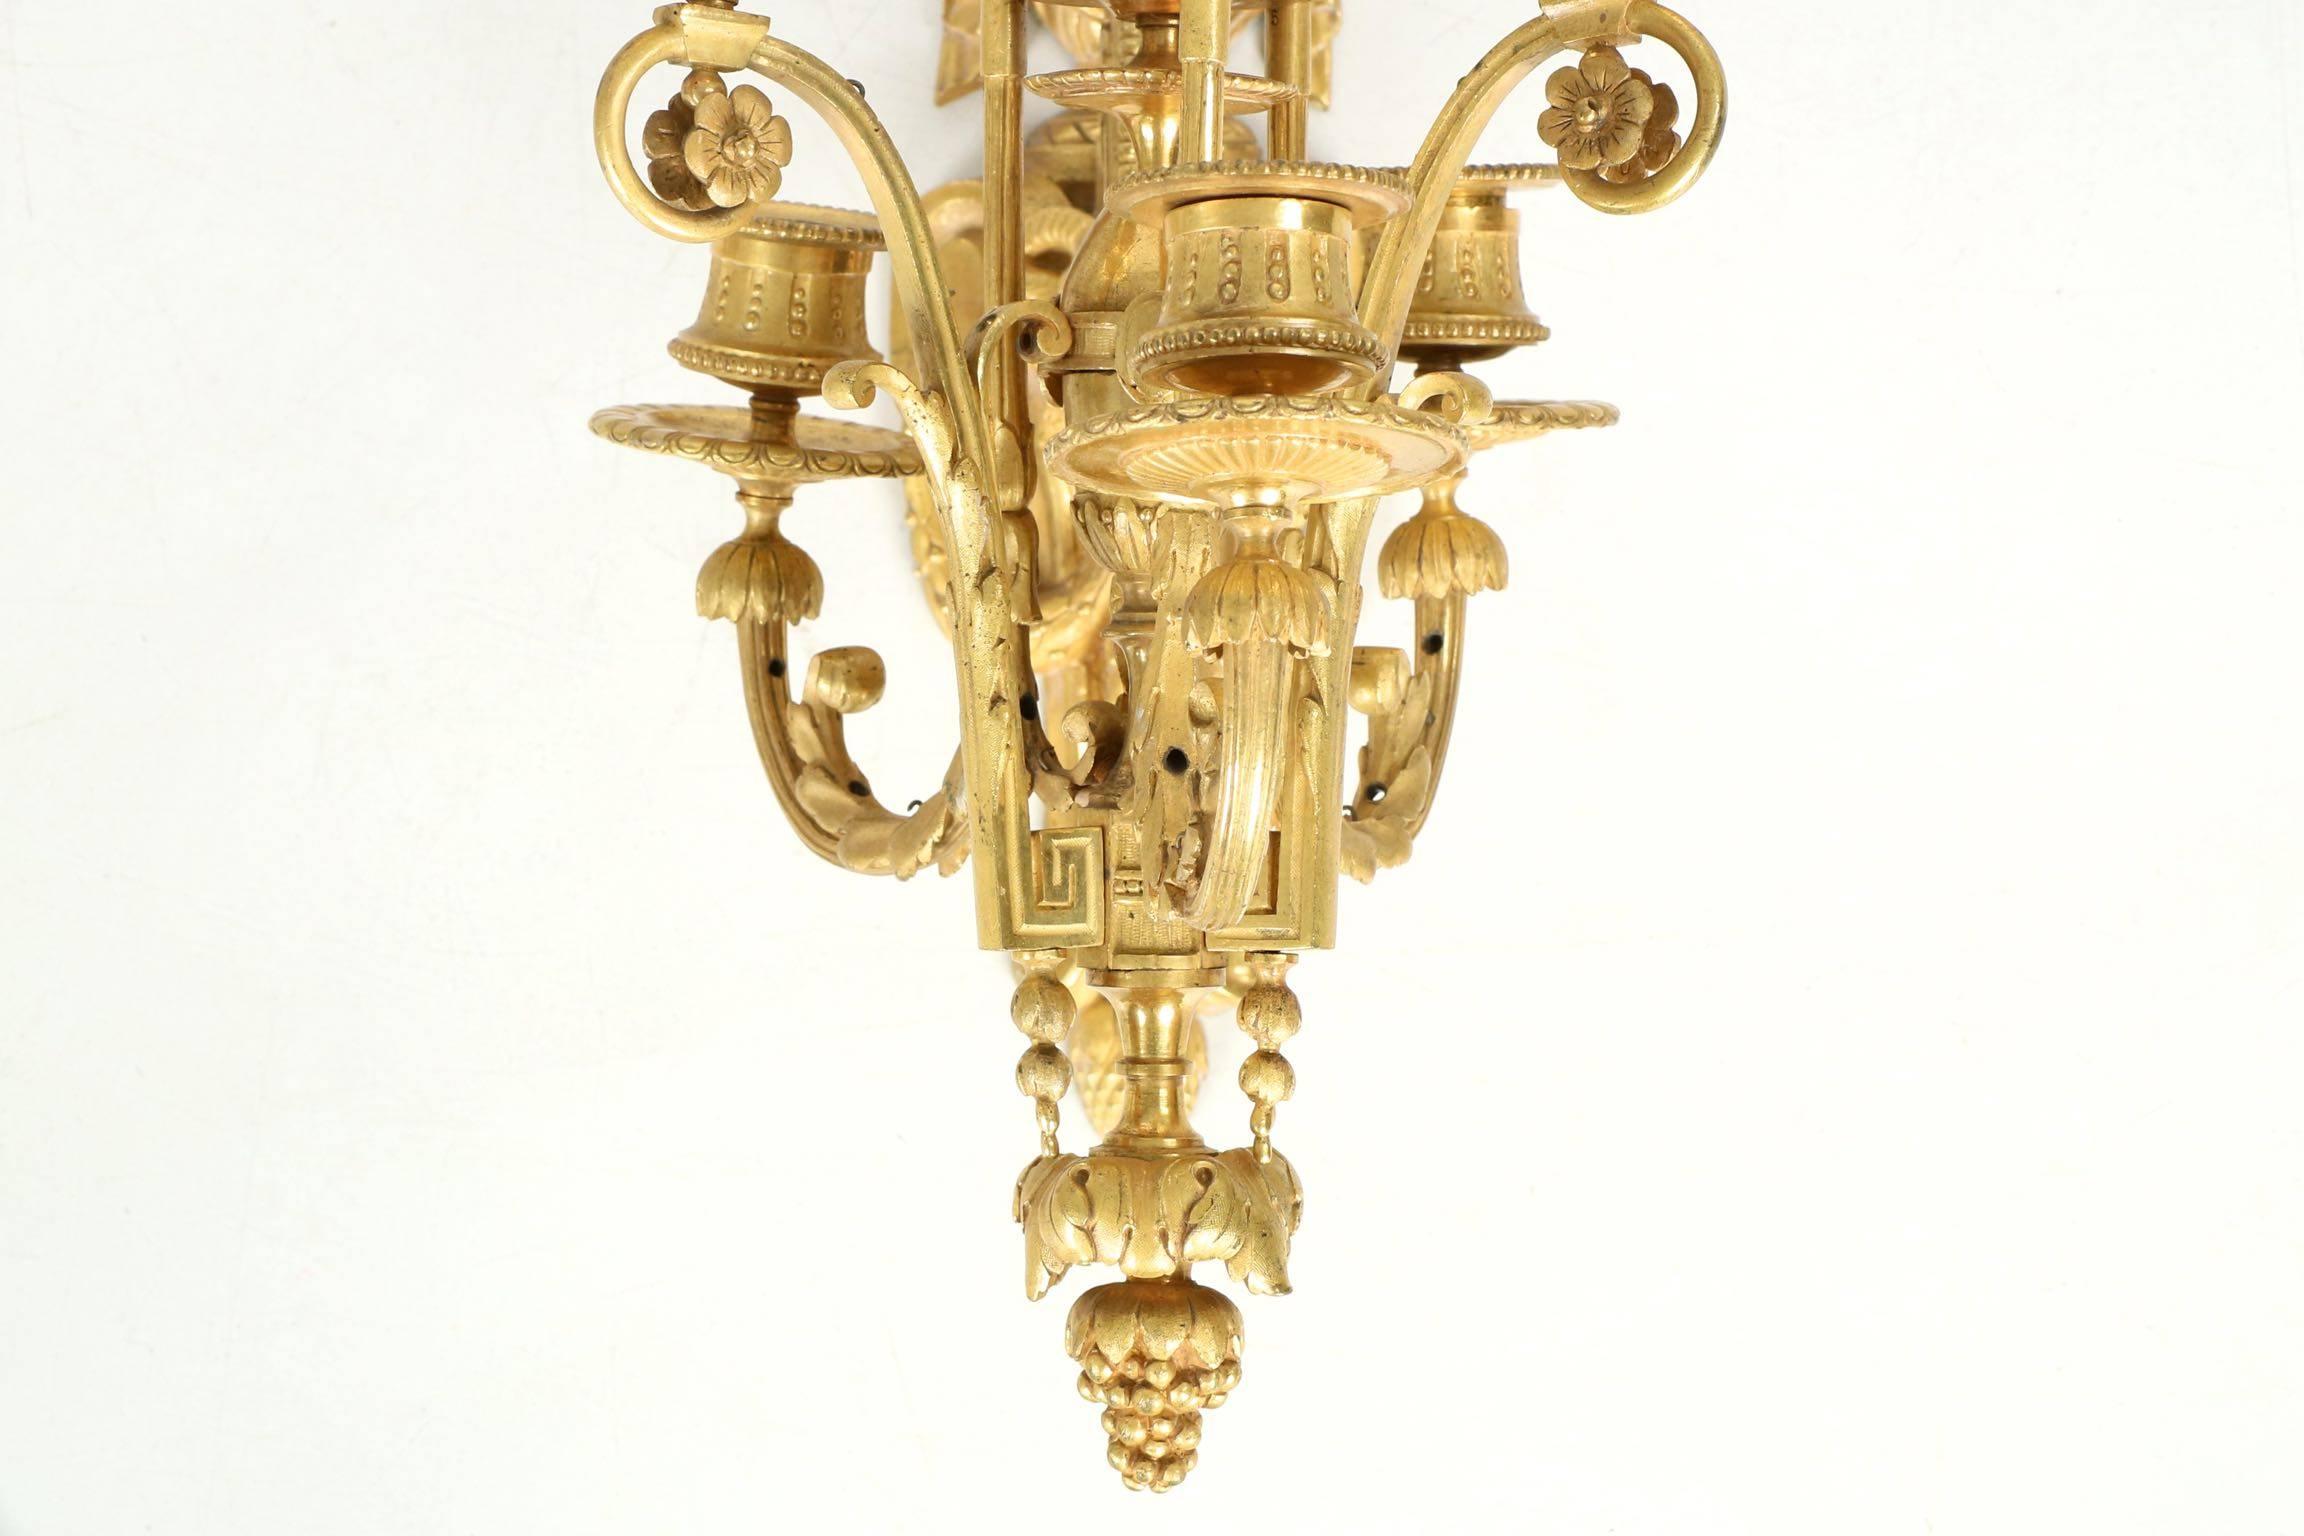 French Pair of Louis XVI Style Bronze Antique Candelabra Wall Sconces, 19th Century